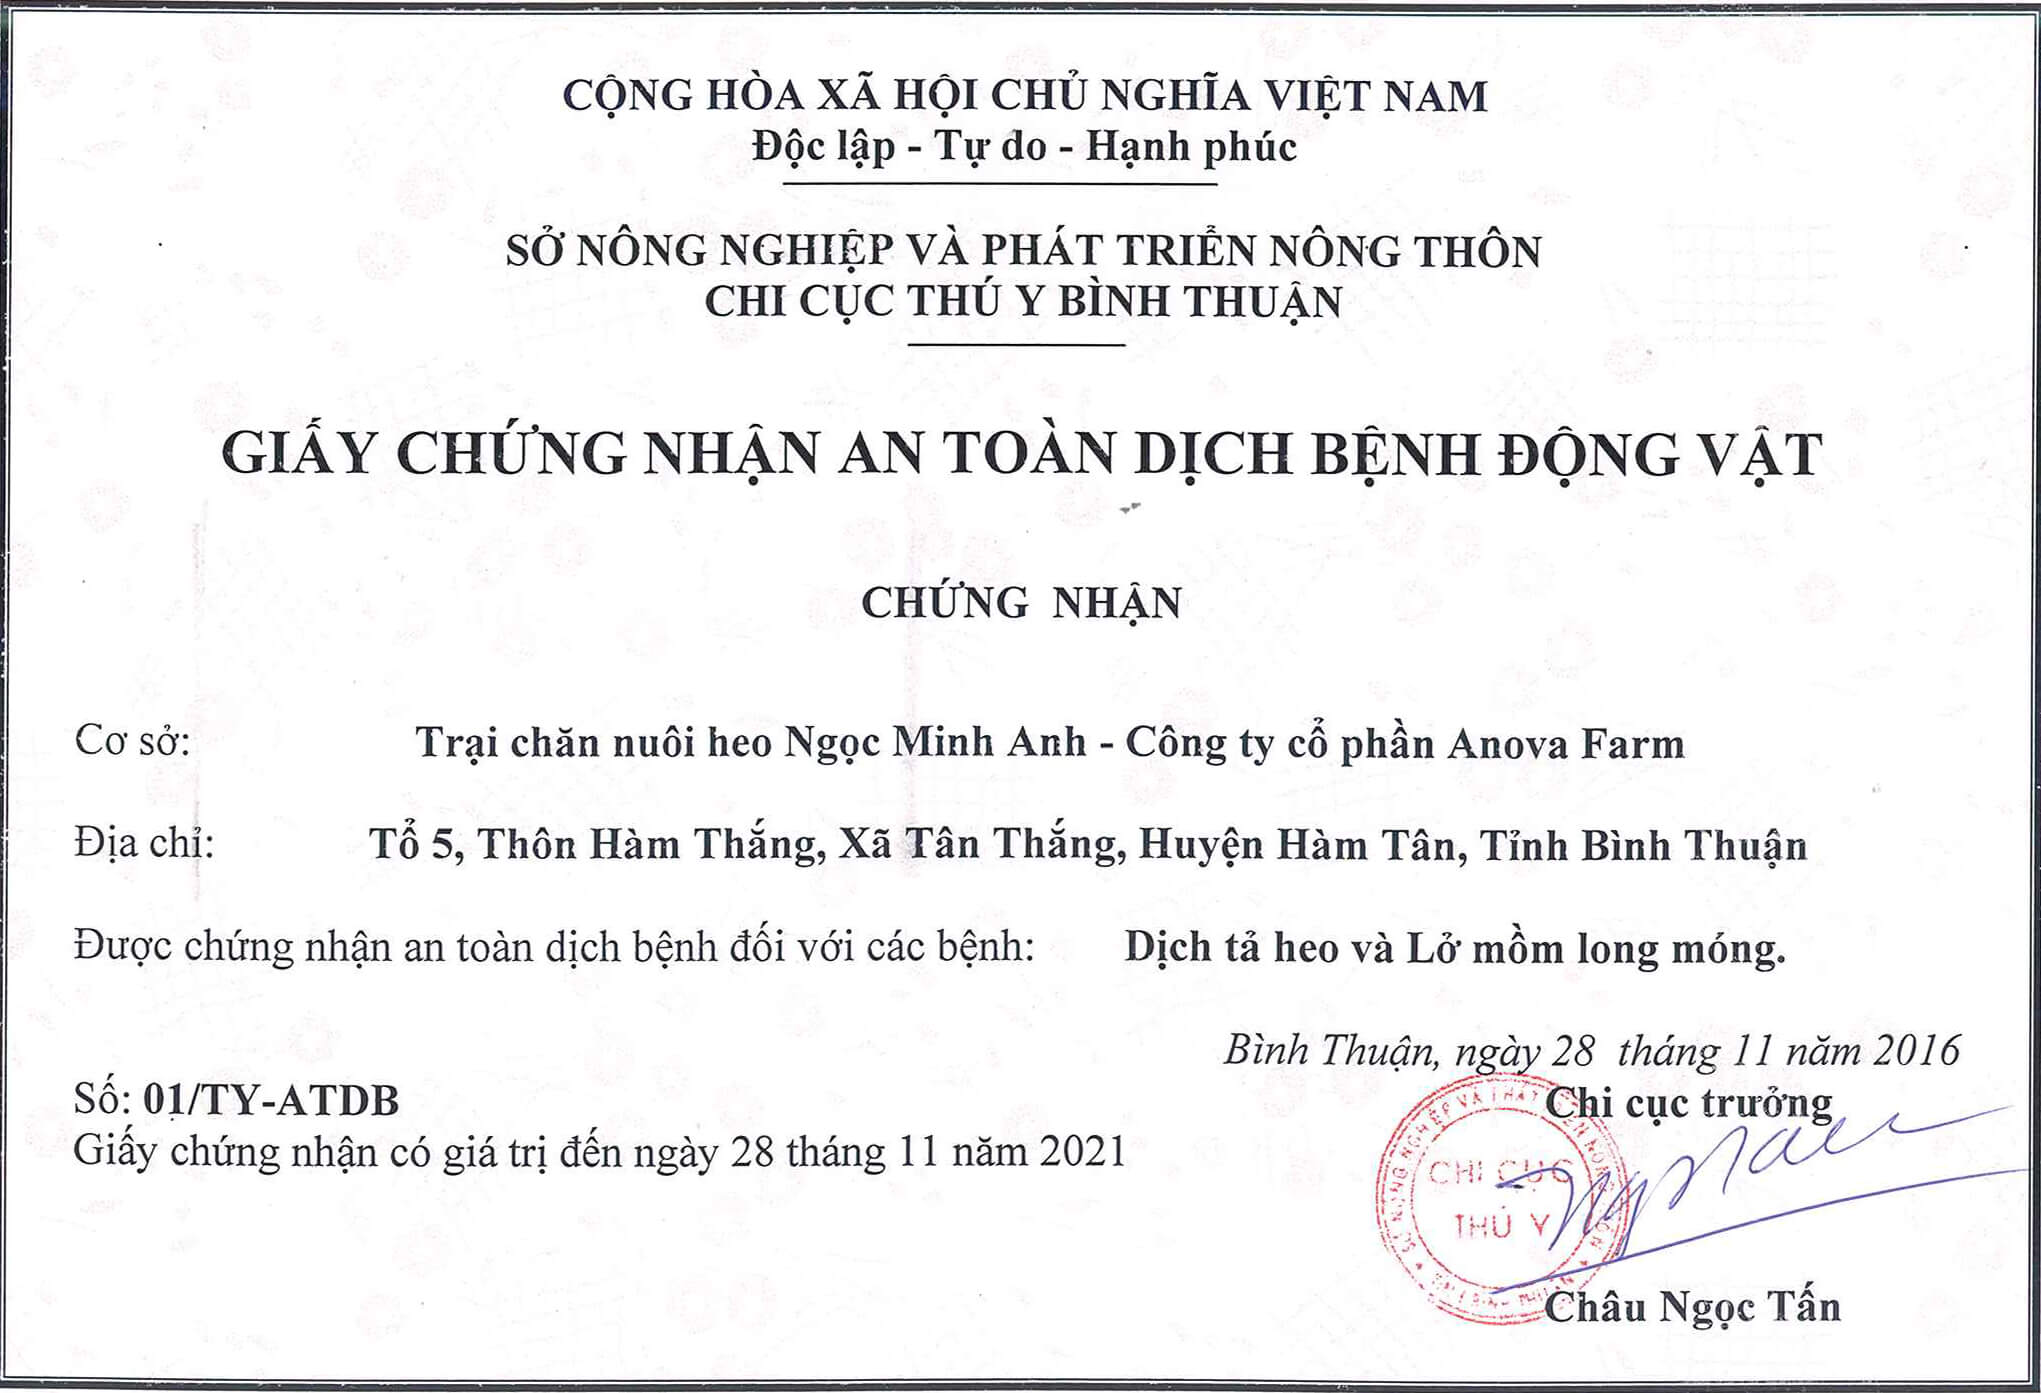 Certificate of animal disease safety - Ngoc Minh Anh facility